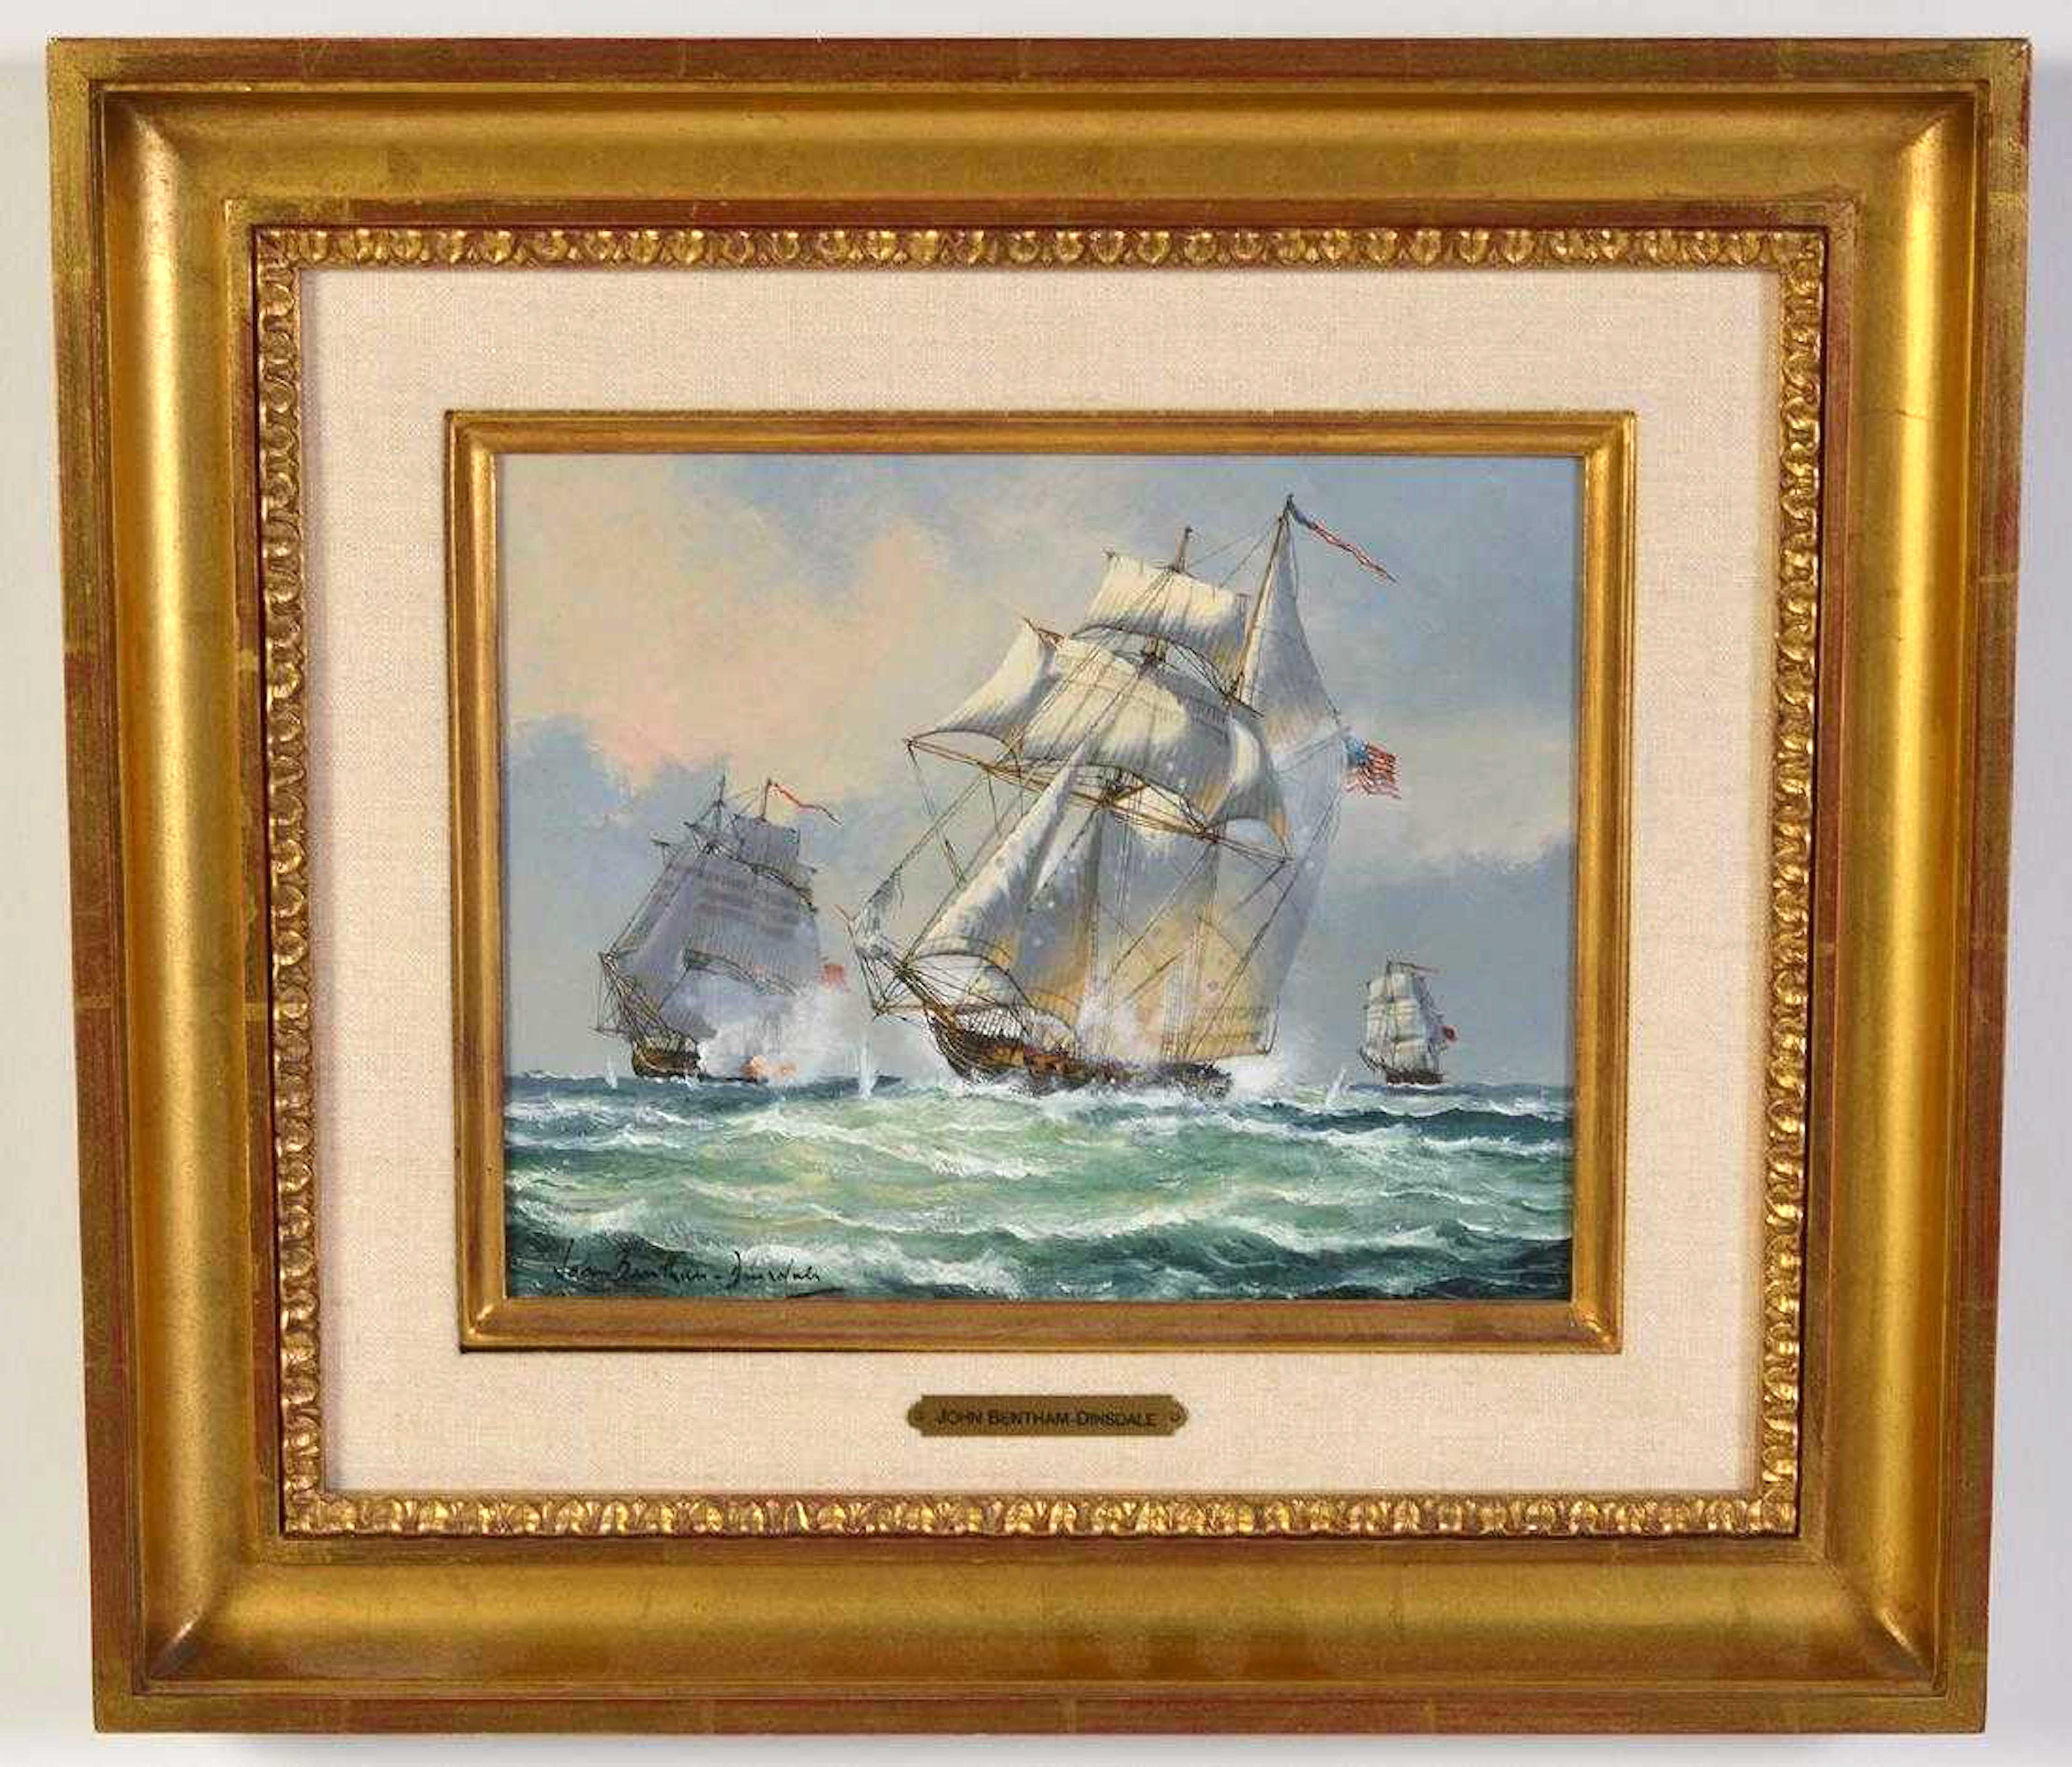 Signed lower left, oil on canvas.

(Born in Yorkshire, England in 1927; died in 2008).

Dinsdale painted the sea and great ships of the era when “Britannia ruled the waves” with her fleets of clipper and fighting ships whose huge white sails